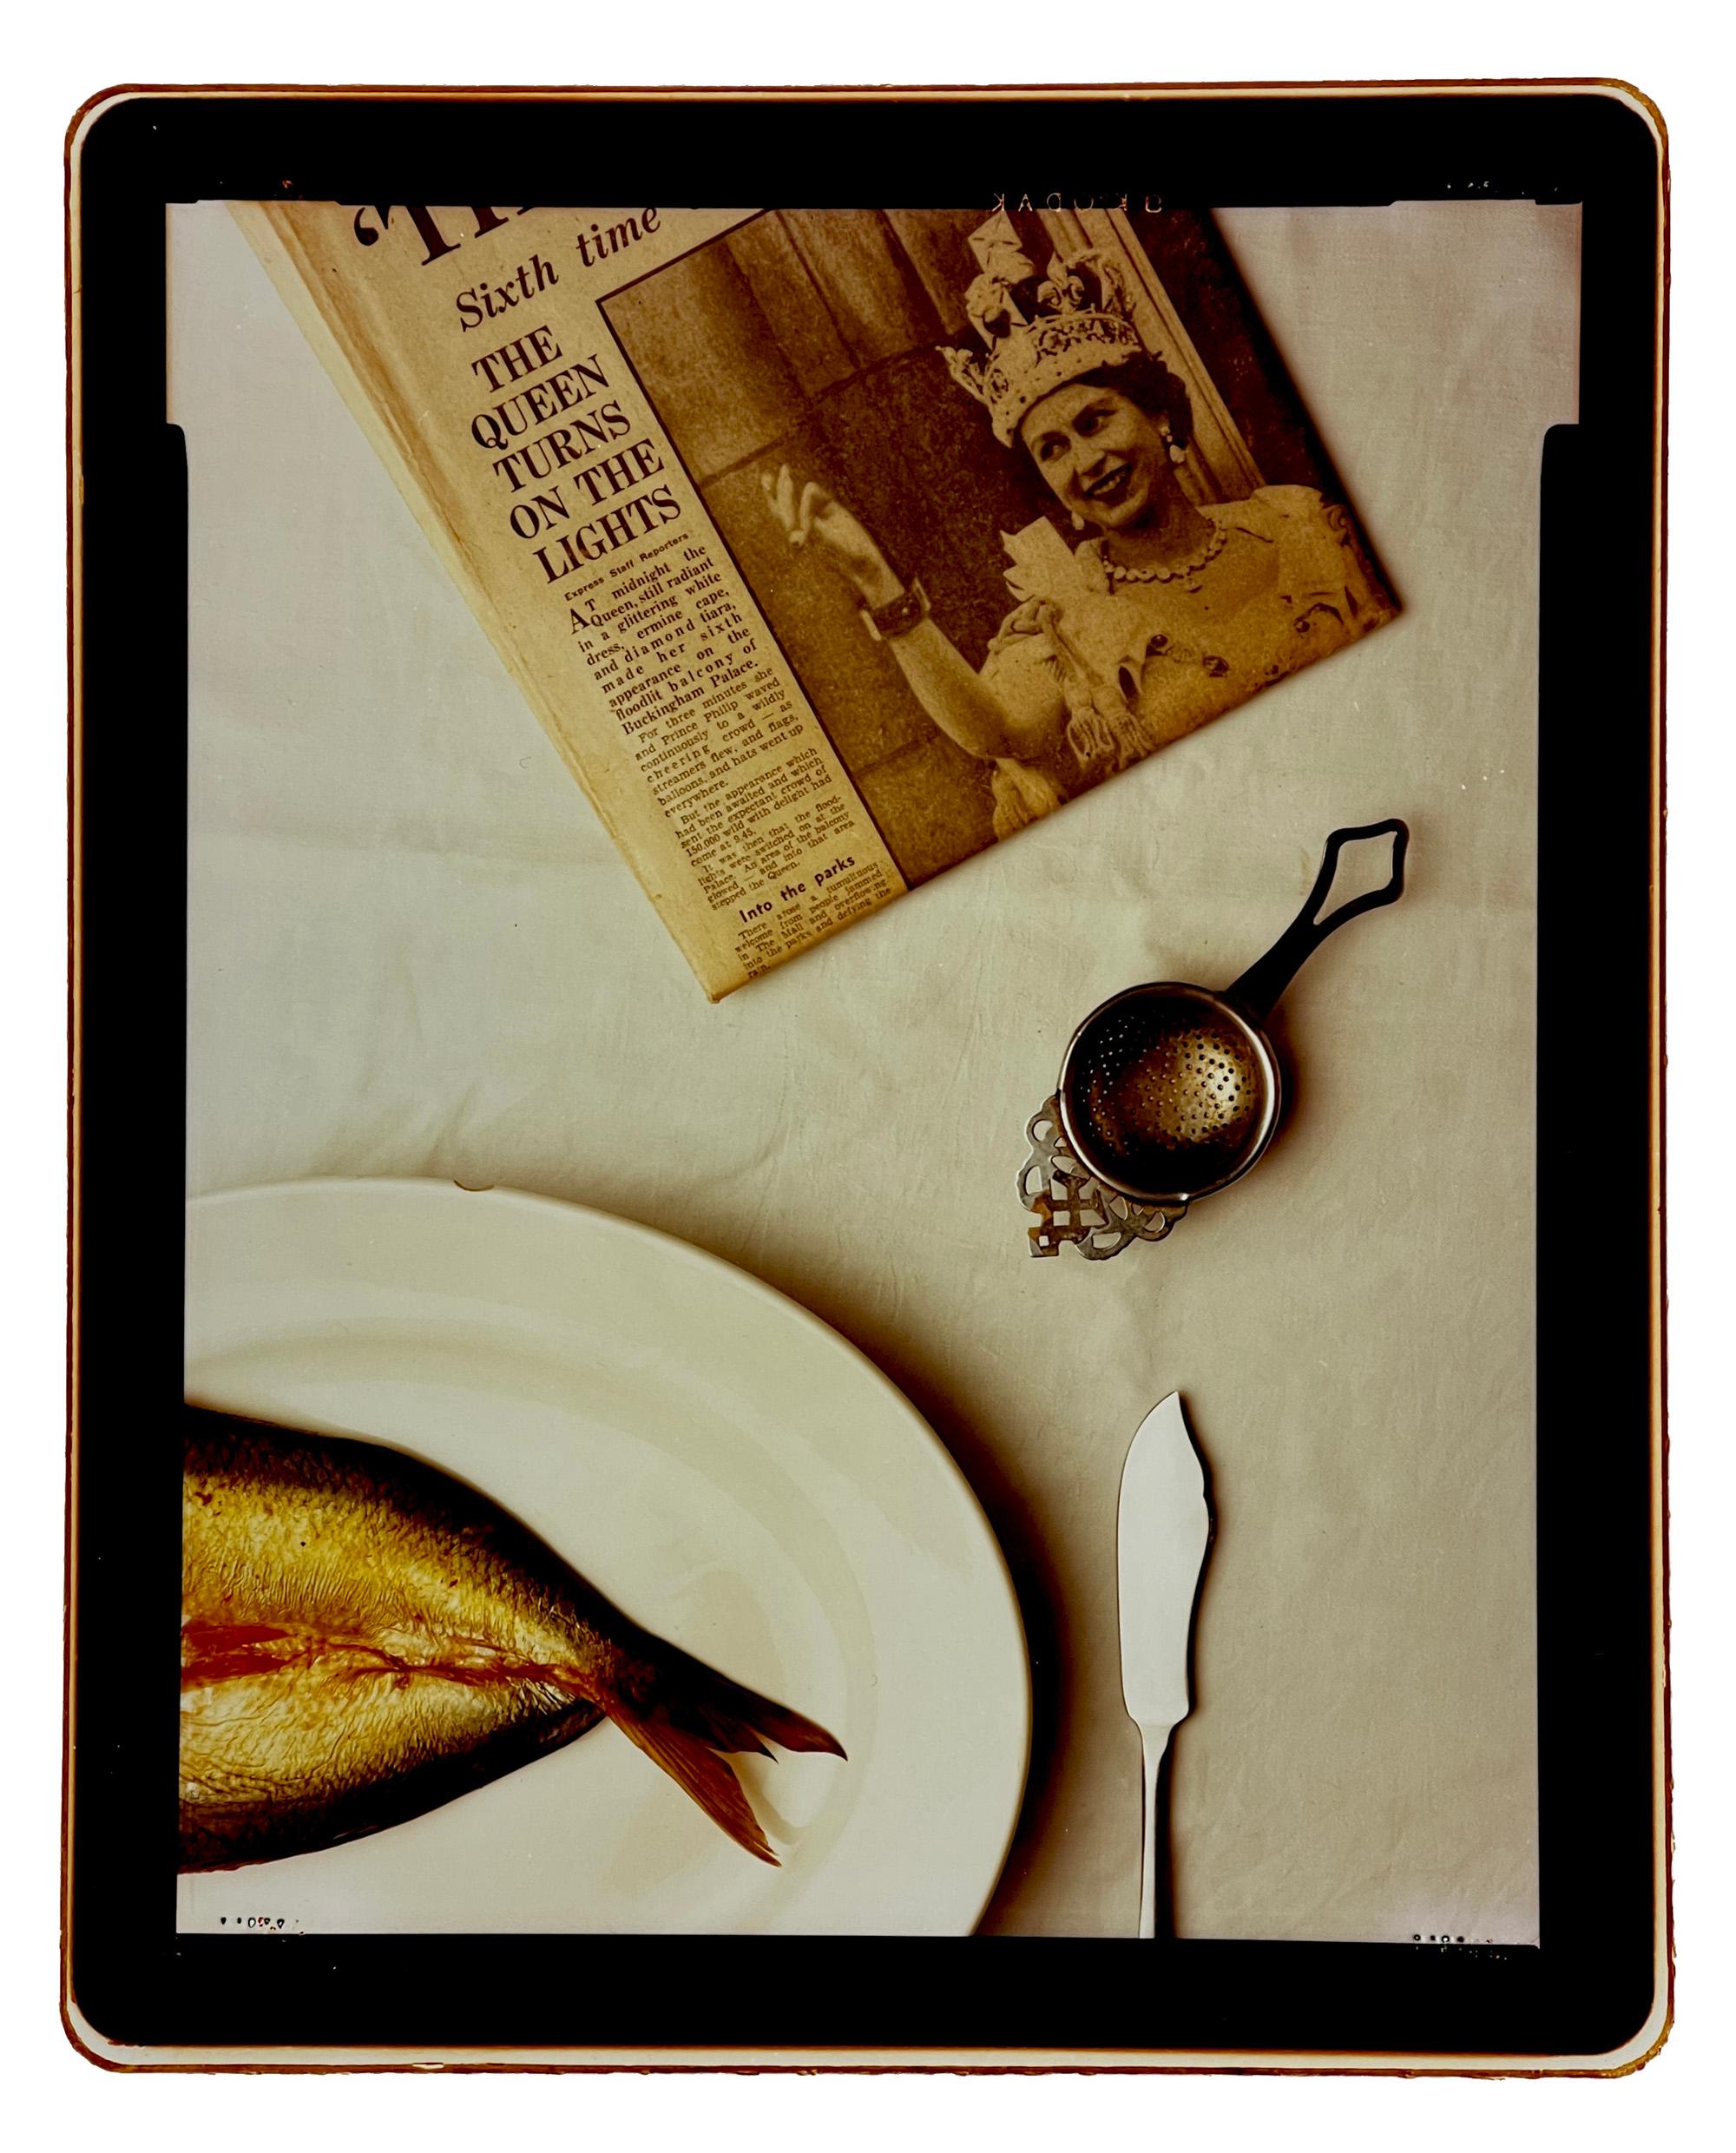 Breakfast Table, is a rare studio creation by Richard Heeps, inspired by a recent visit to Fleetwood, incorporating autobiographical elements, brought in to create a simple still life on the subject of food. Taken using a 5x4 camera in 1987, printed